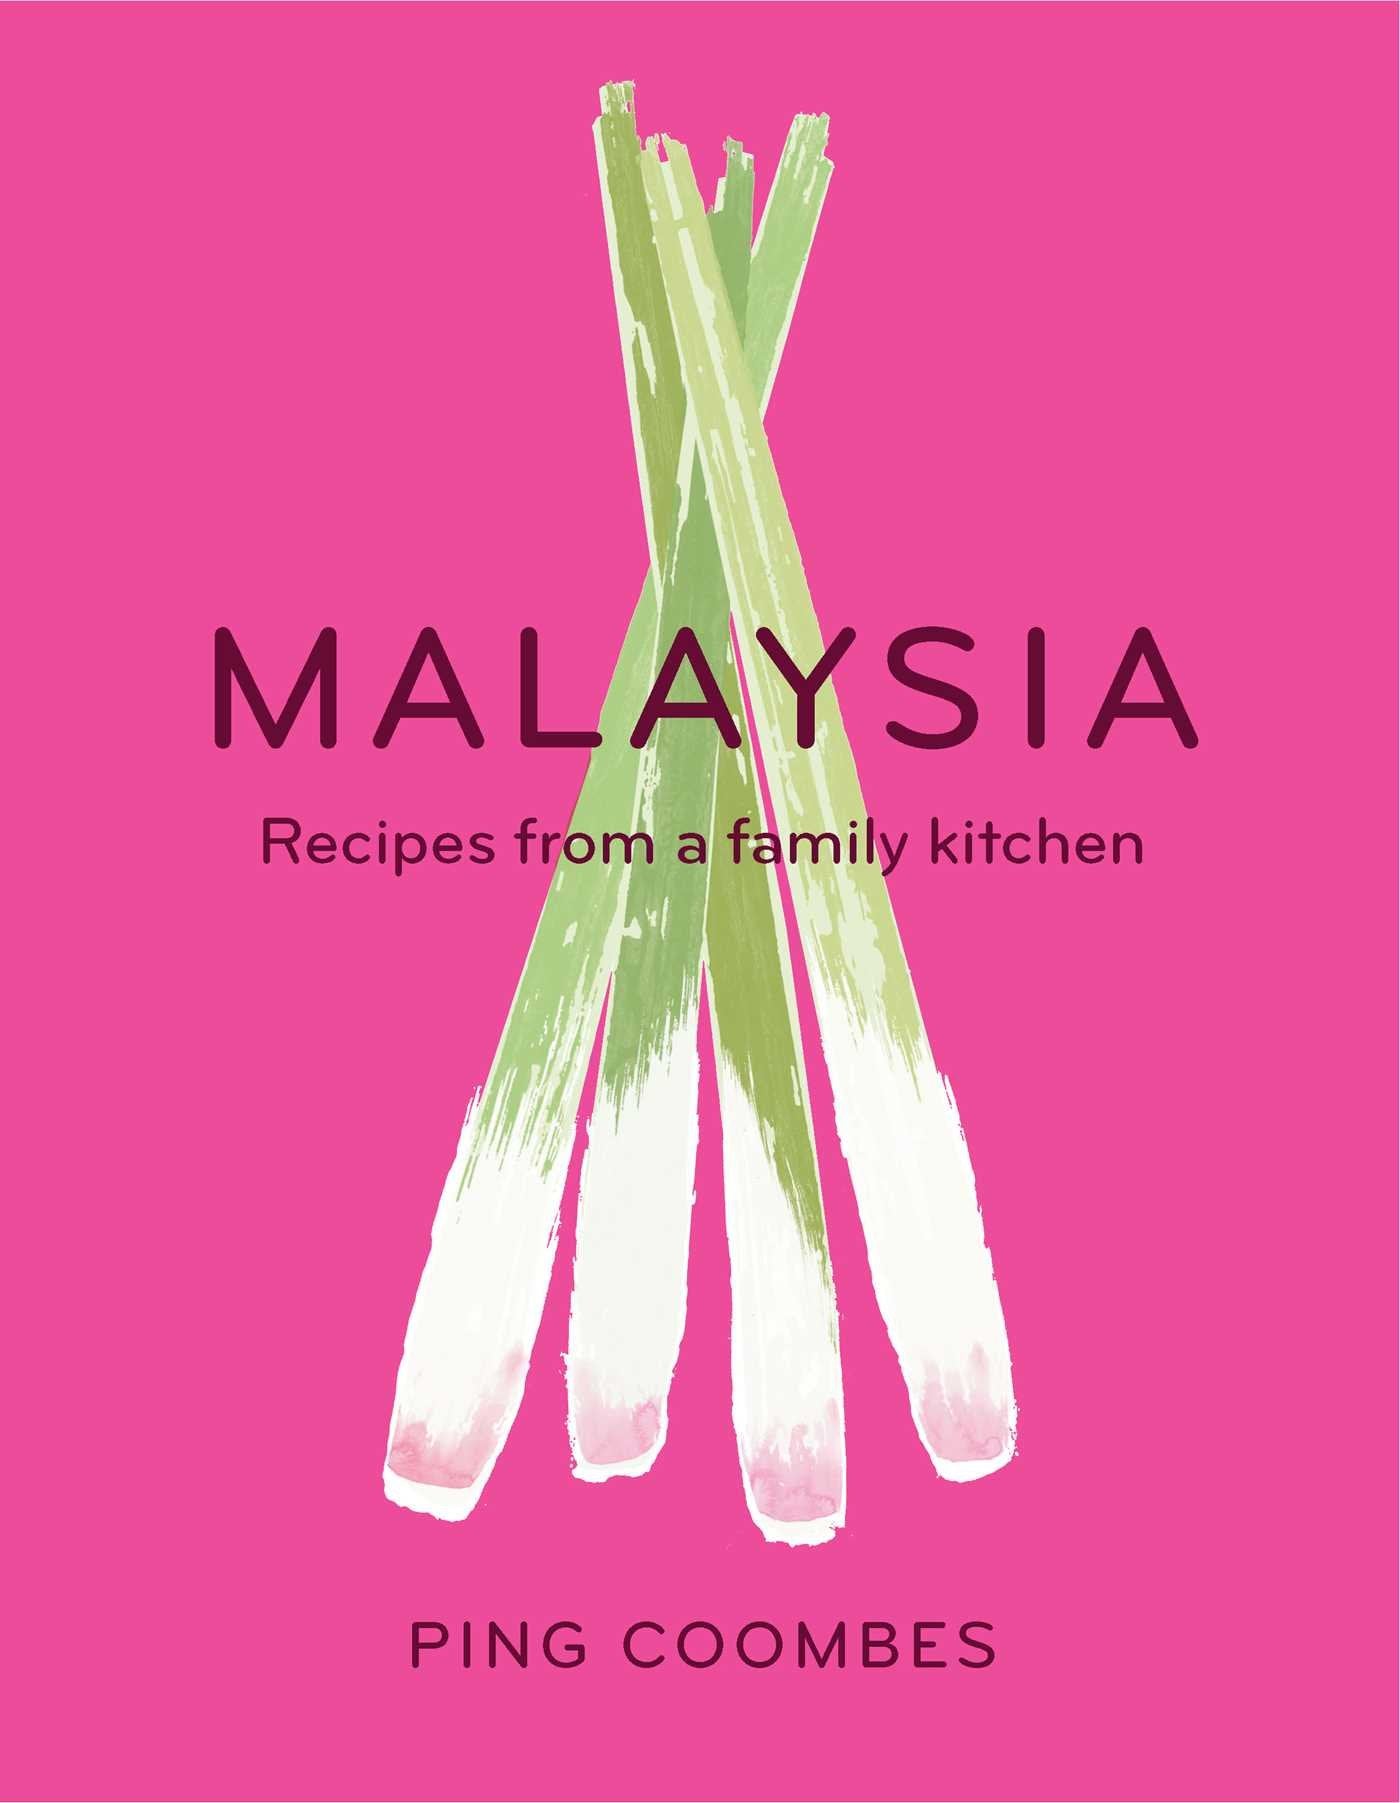 Malaysia: Recipes From a Family Kitchen (Ping Coombes)